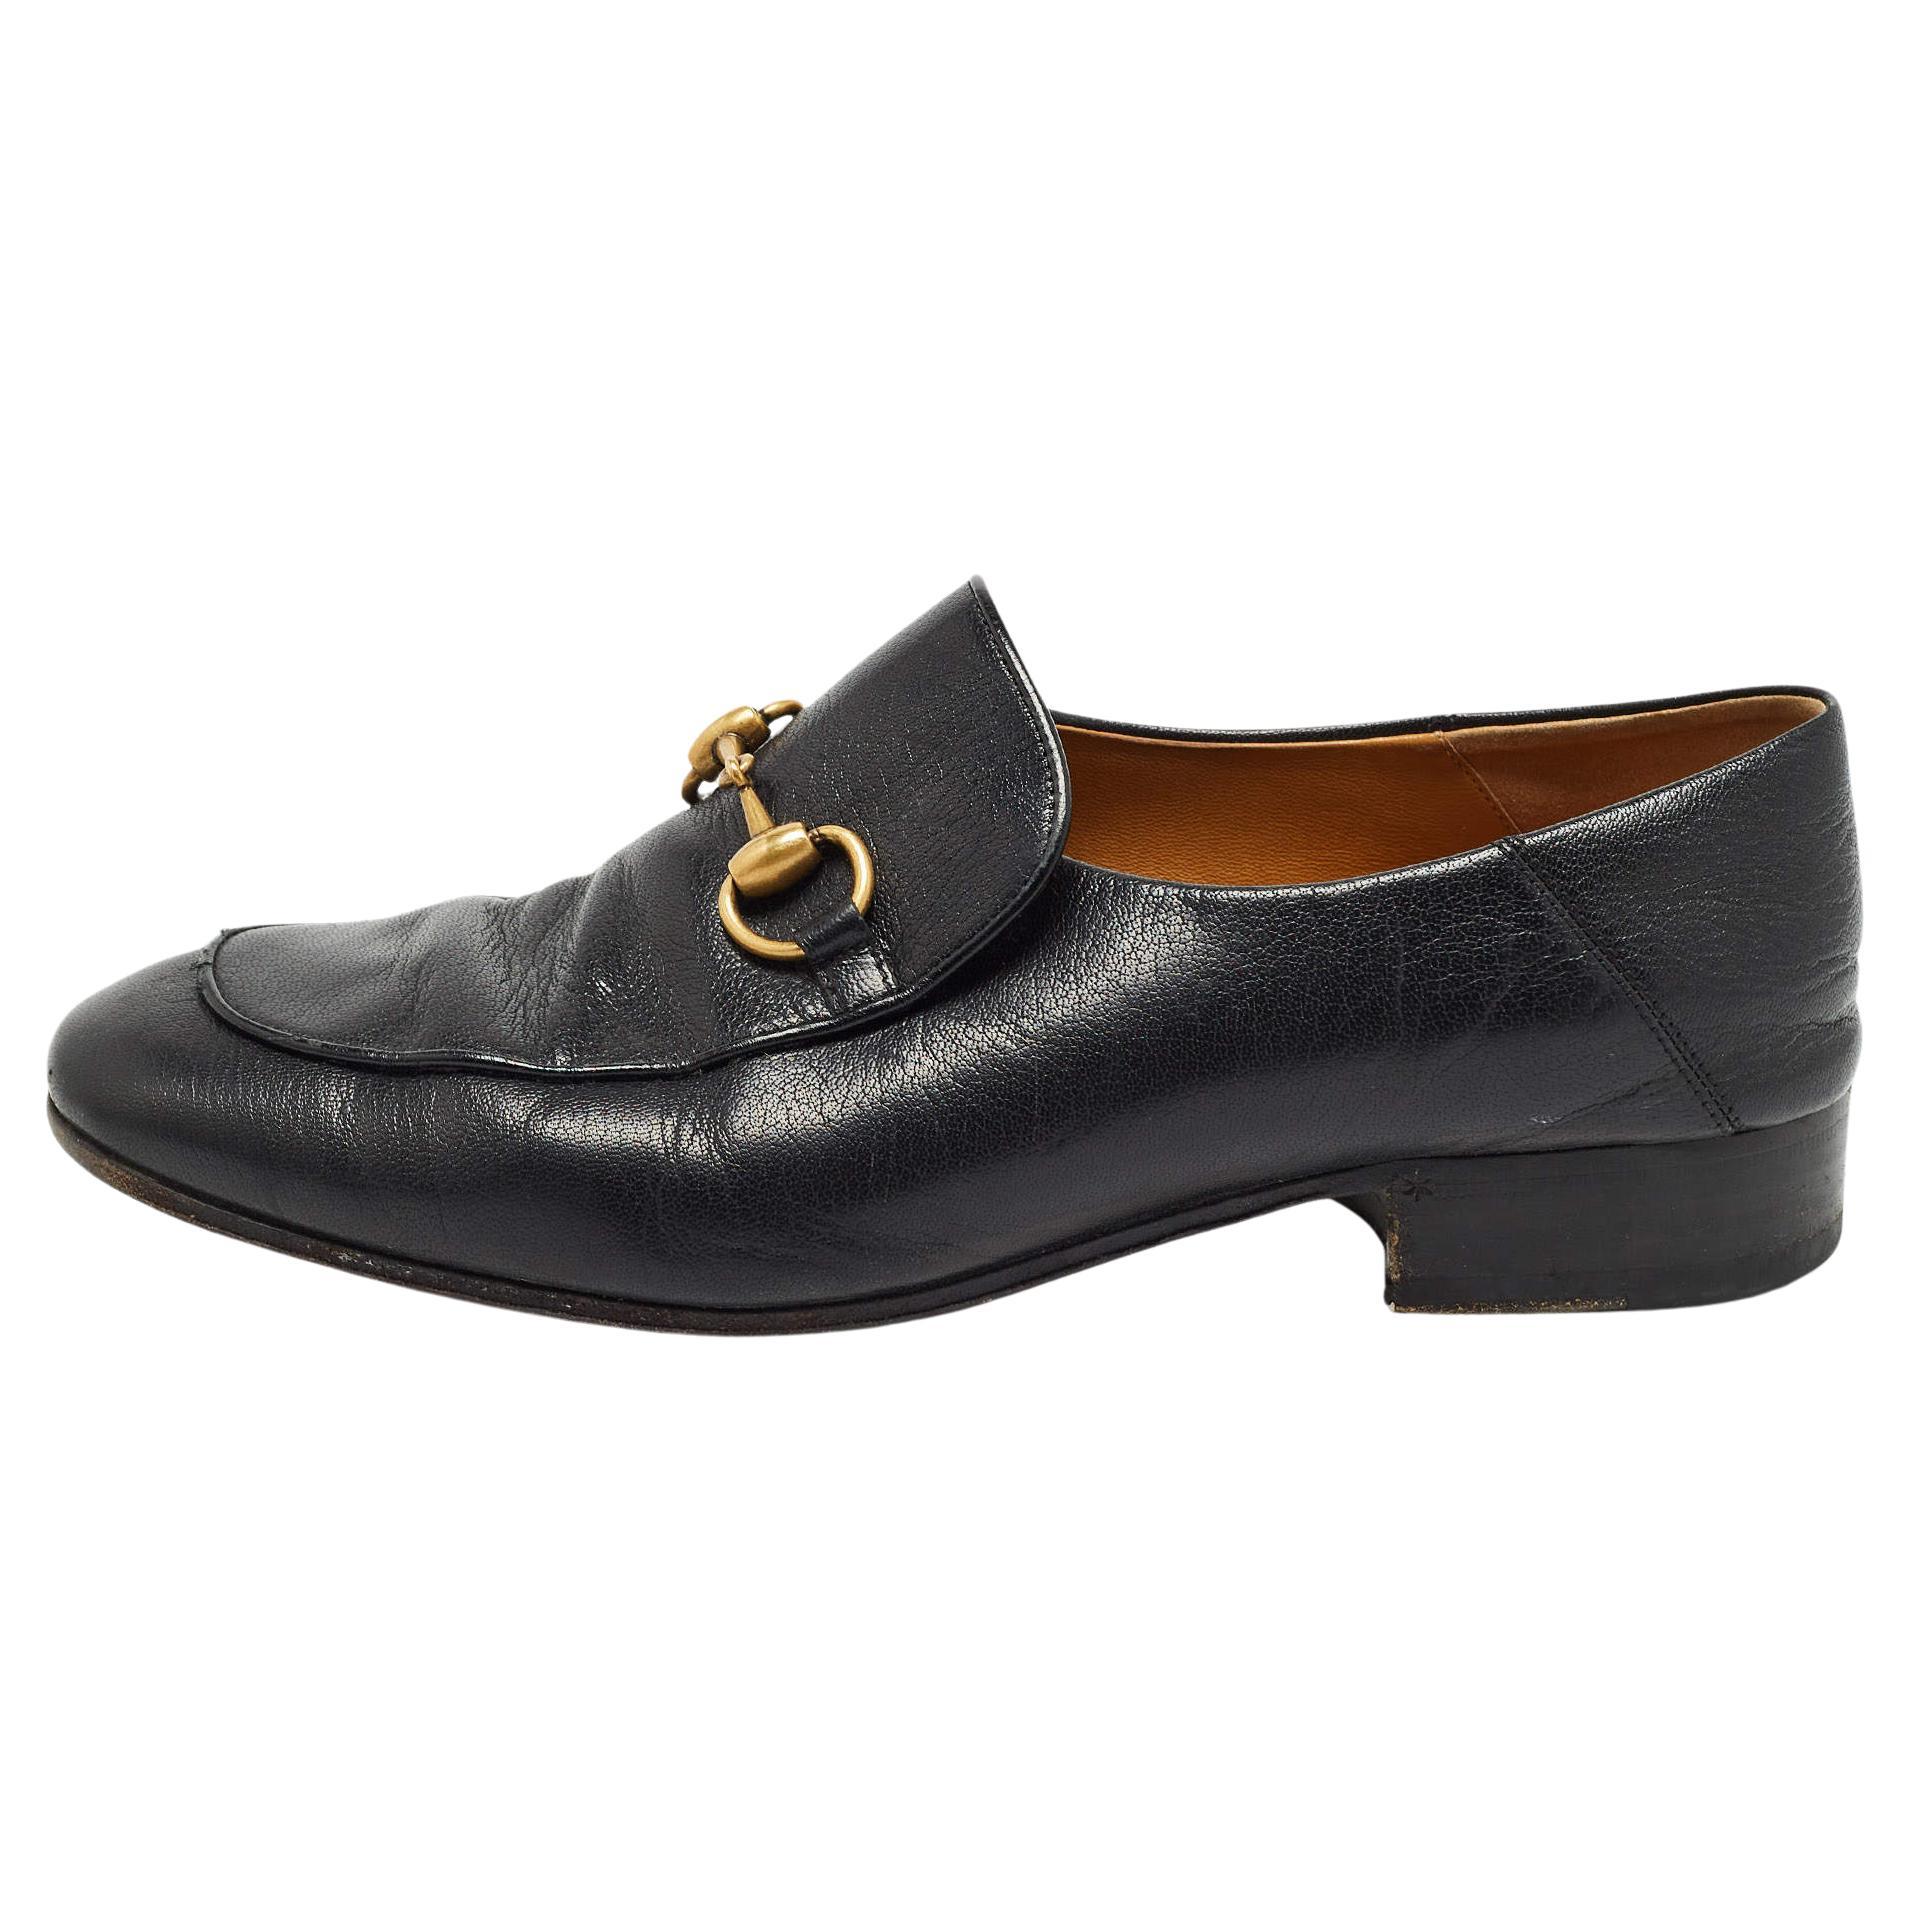 Gucci Black Leather Horsebit 1953 Loafers Size 40.5